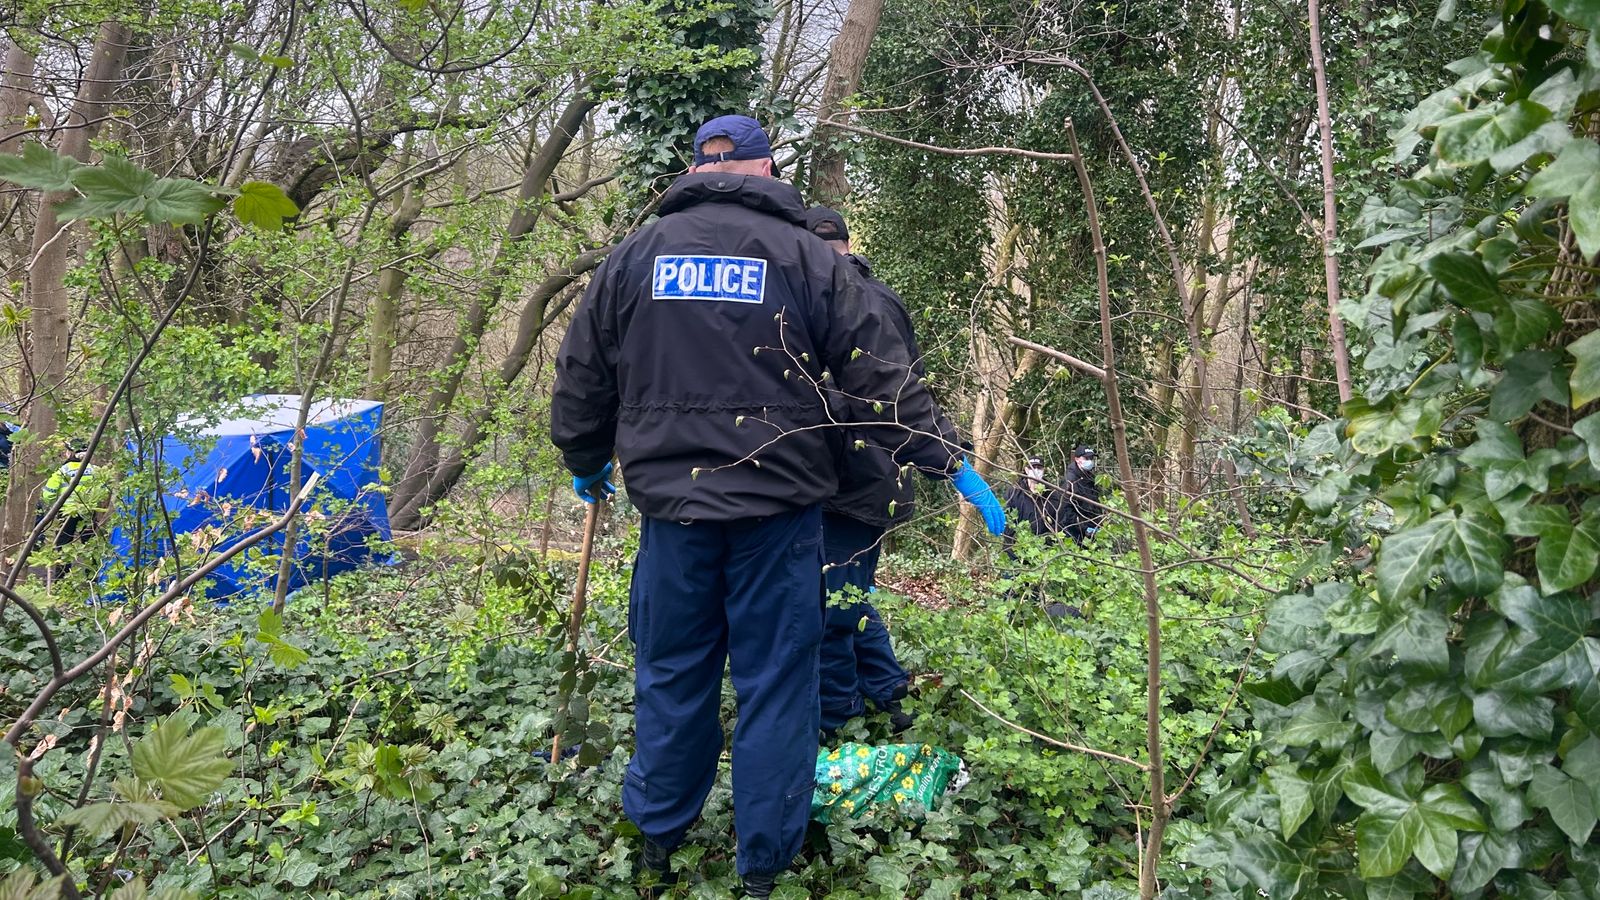 Human remains wrapped in plastic found at nature reserve in Salford